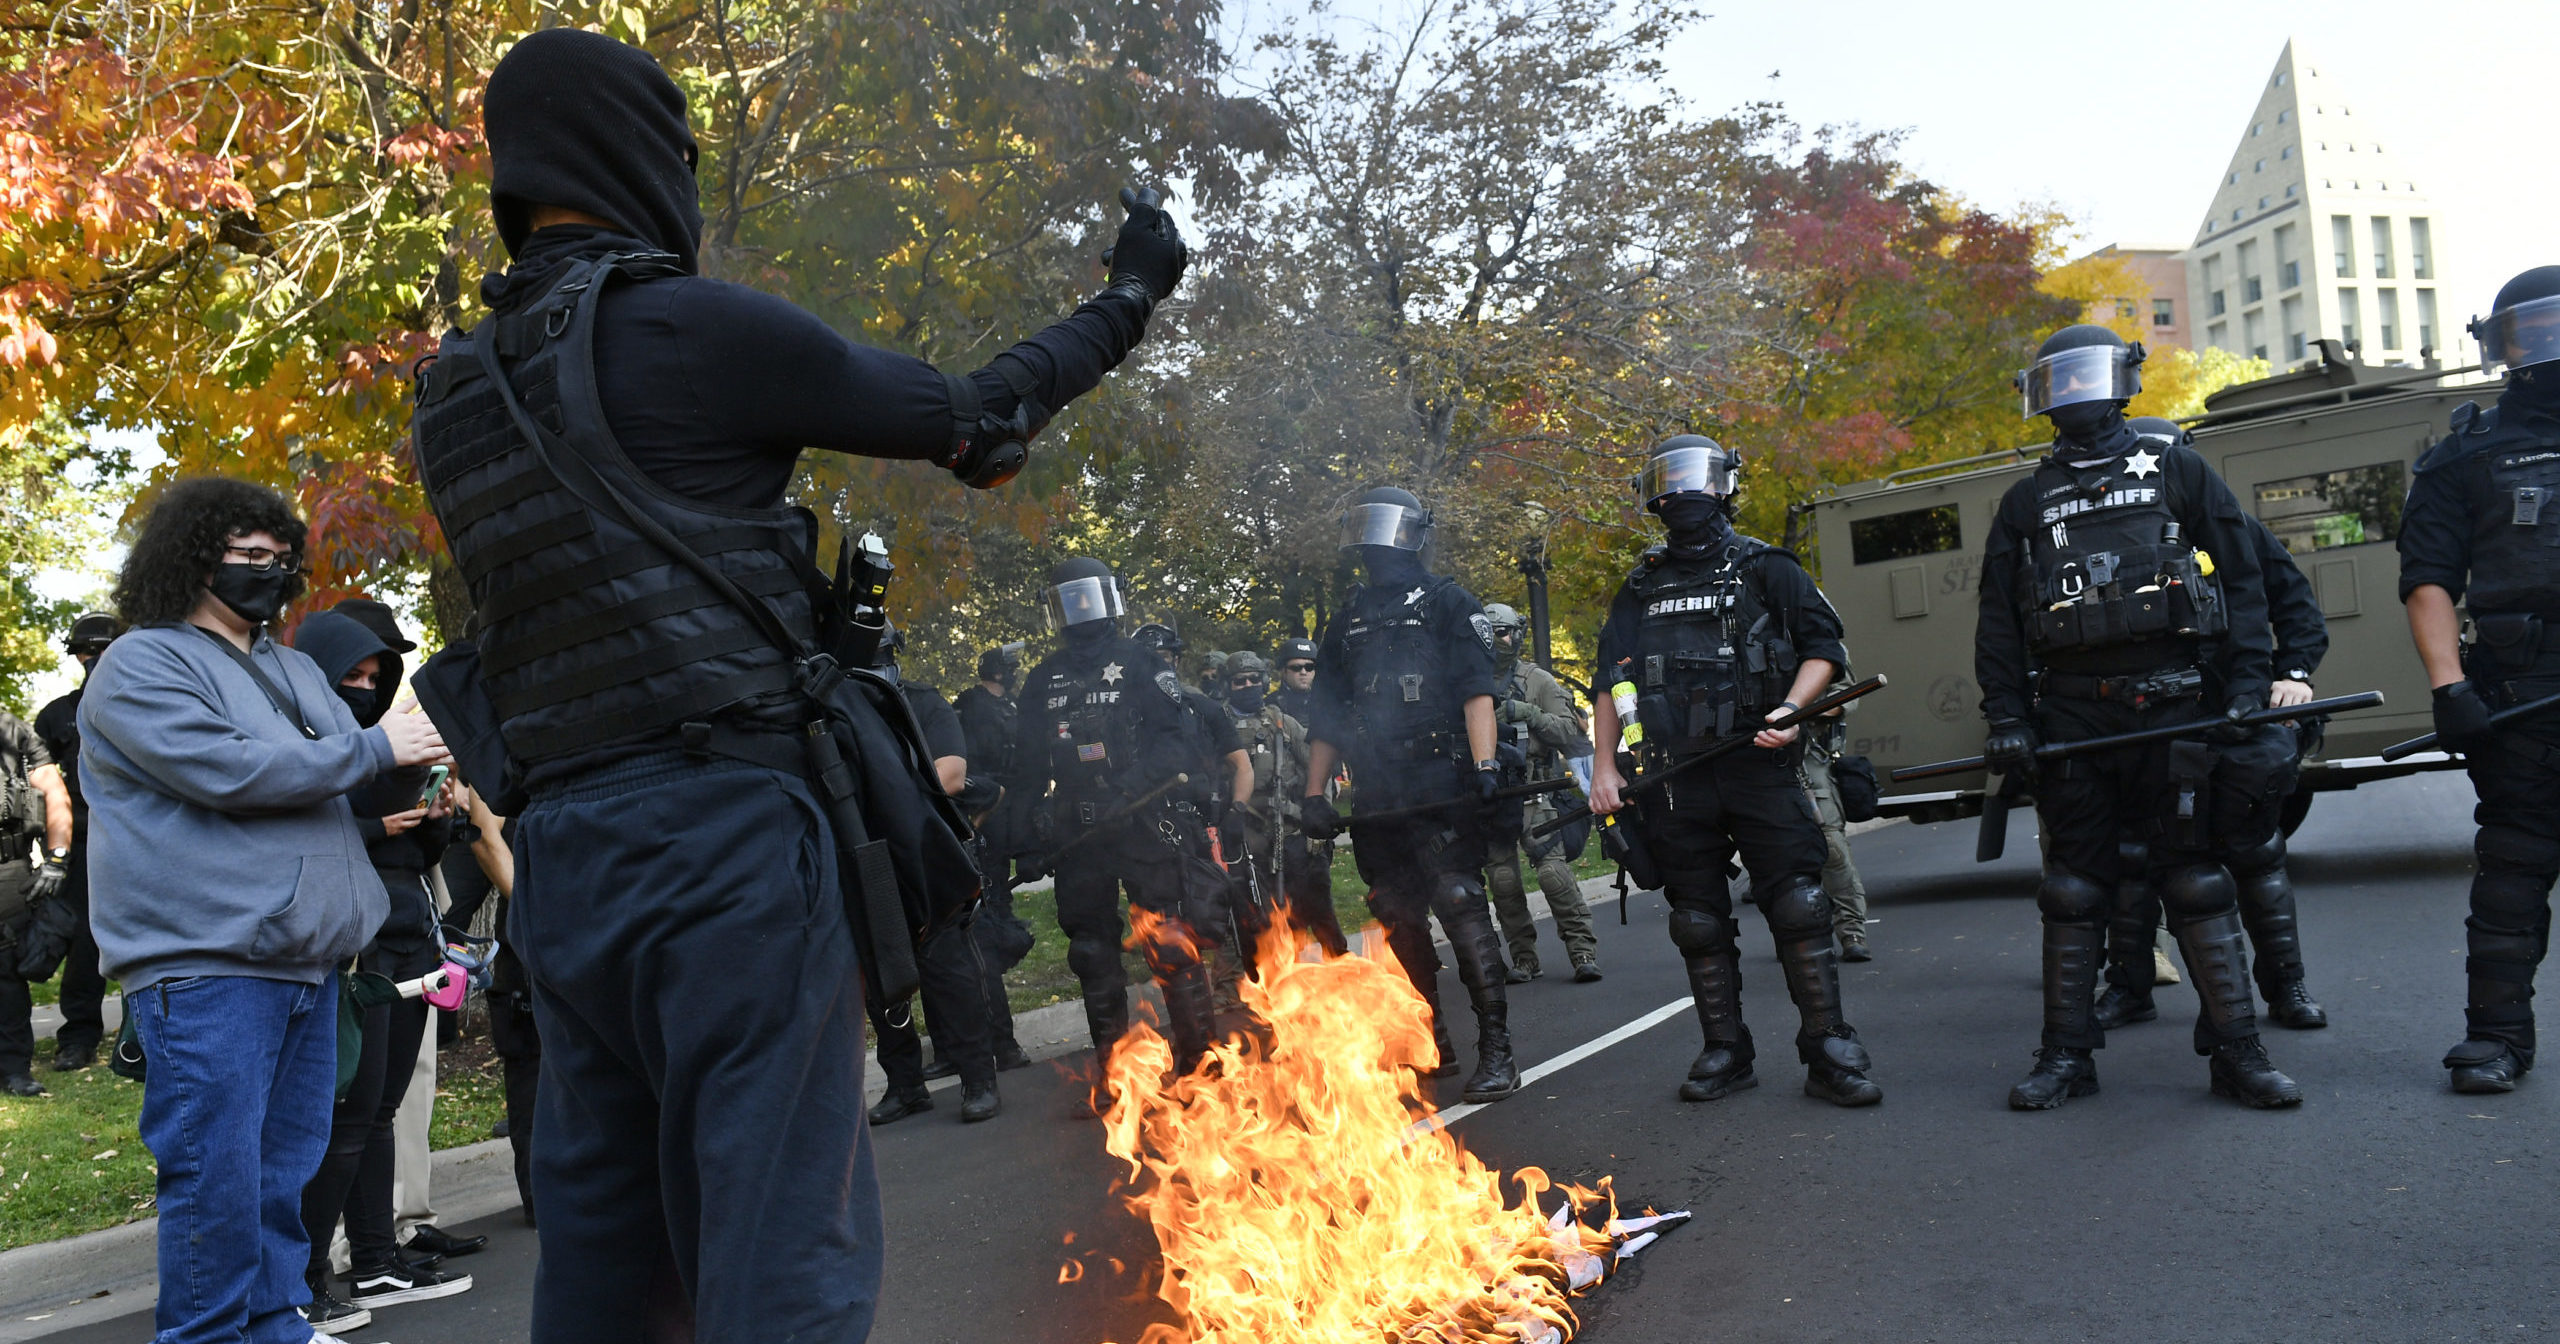 Protesters burn a police flag in front of law enforcement officers during dueling rallies between right- and left-wing groups on Oct. 10, 2020, in Denver.